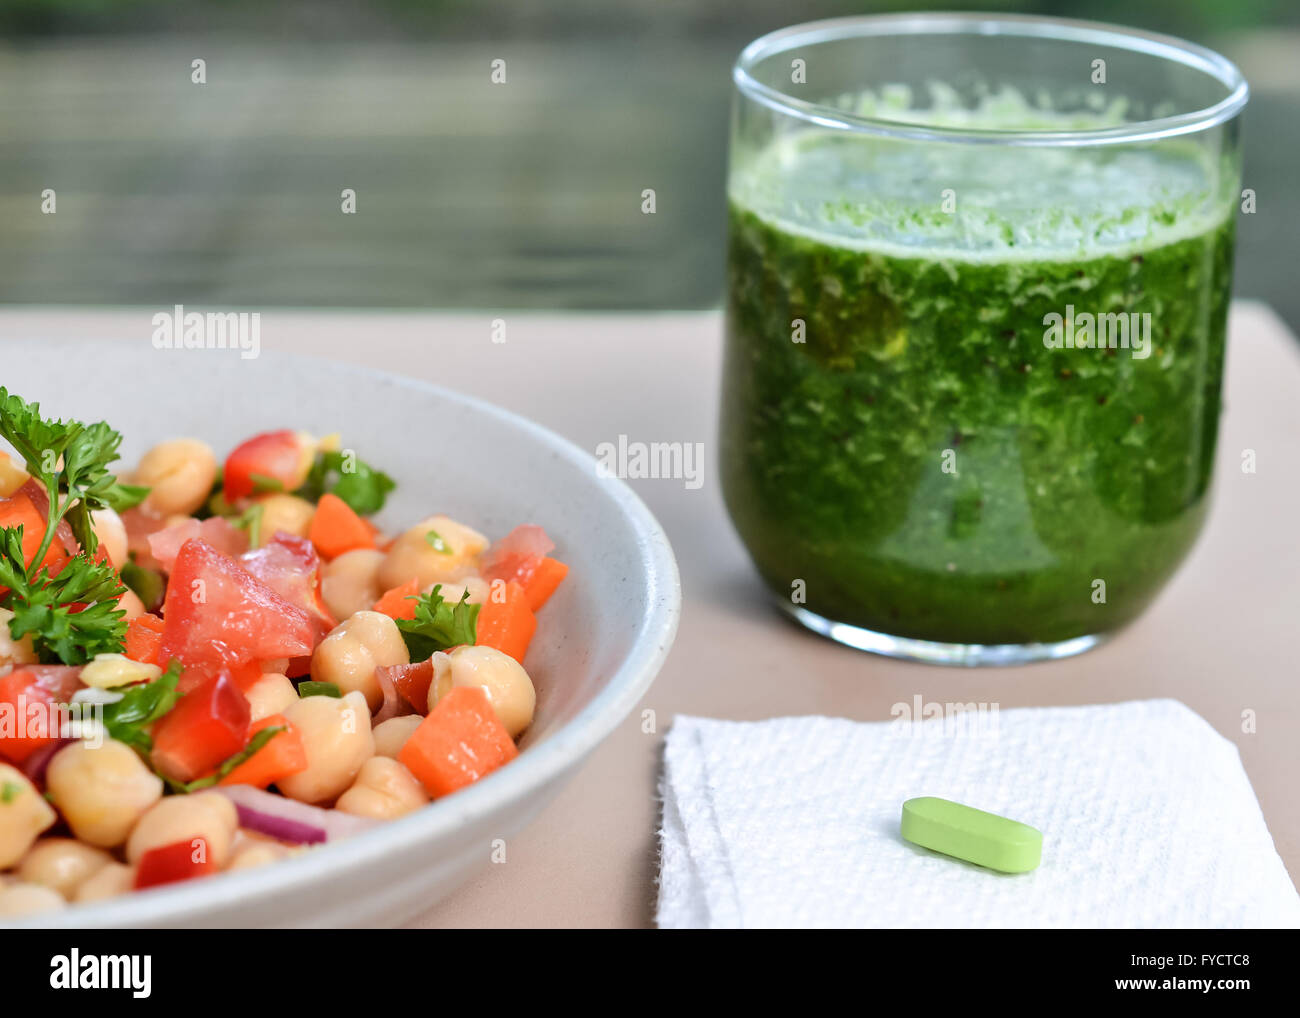 Sources of calcium: garbanzo salad, detox kale smoothie and oyster shell calcium supplement Stock Photo